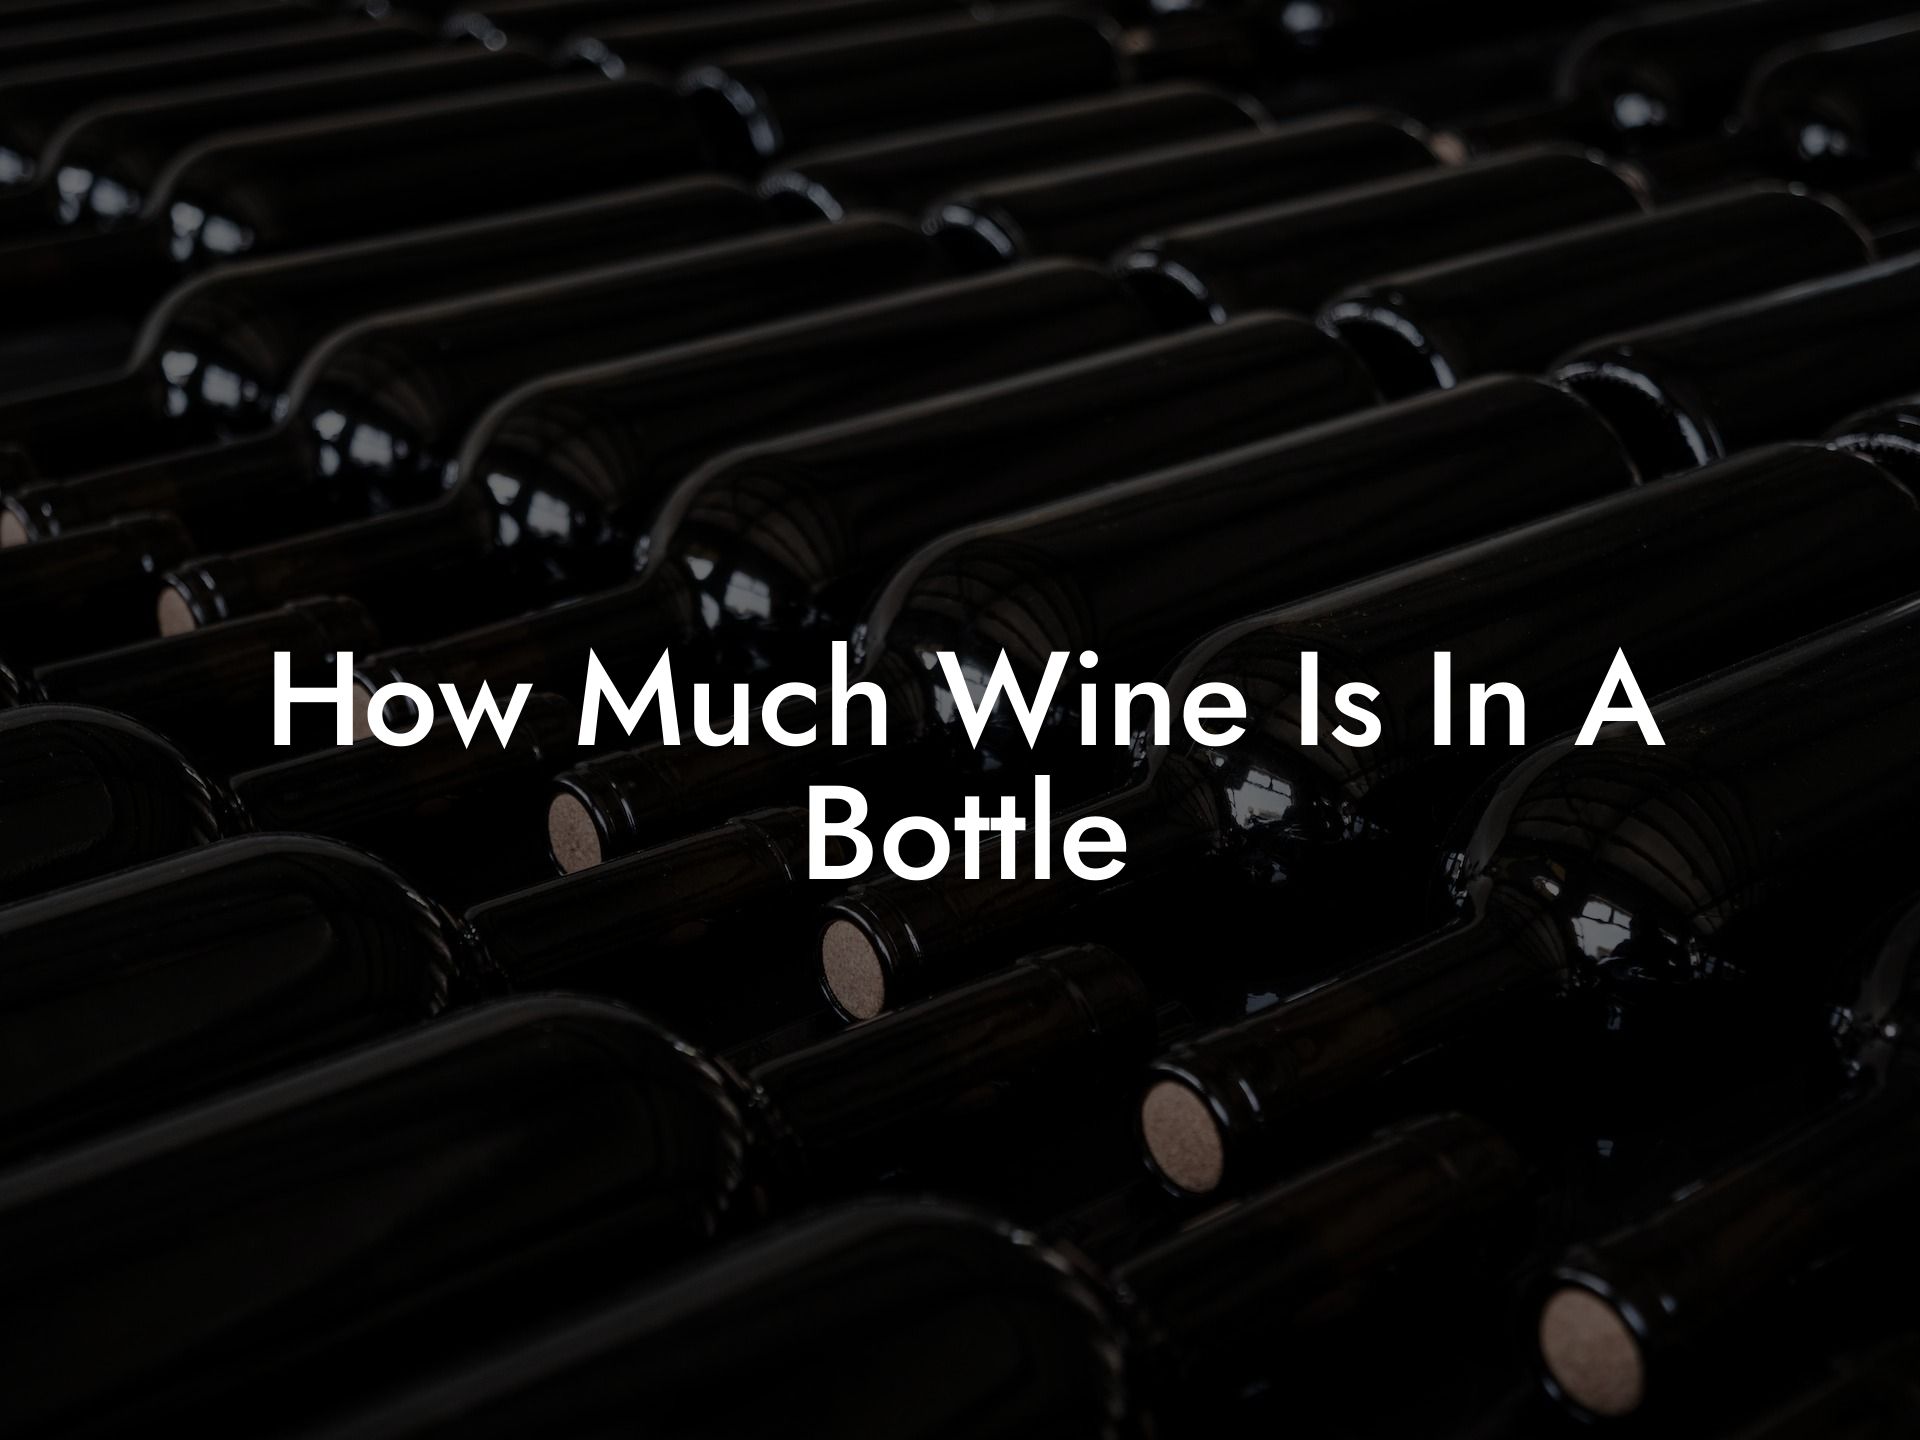 How Much Wine Is In A Bottle